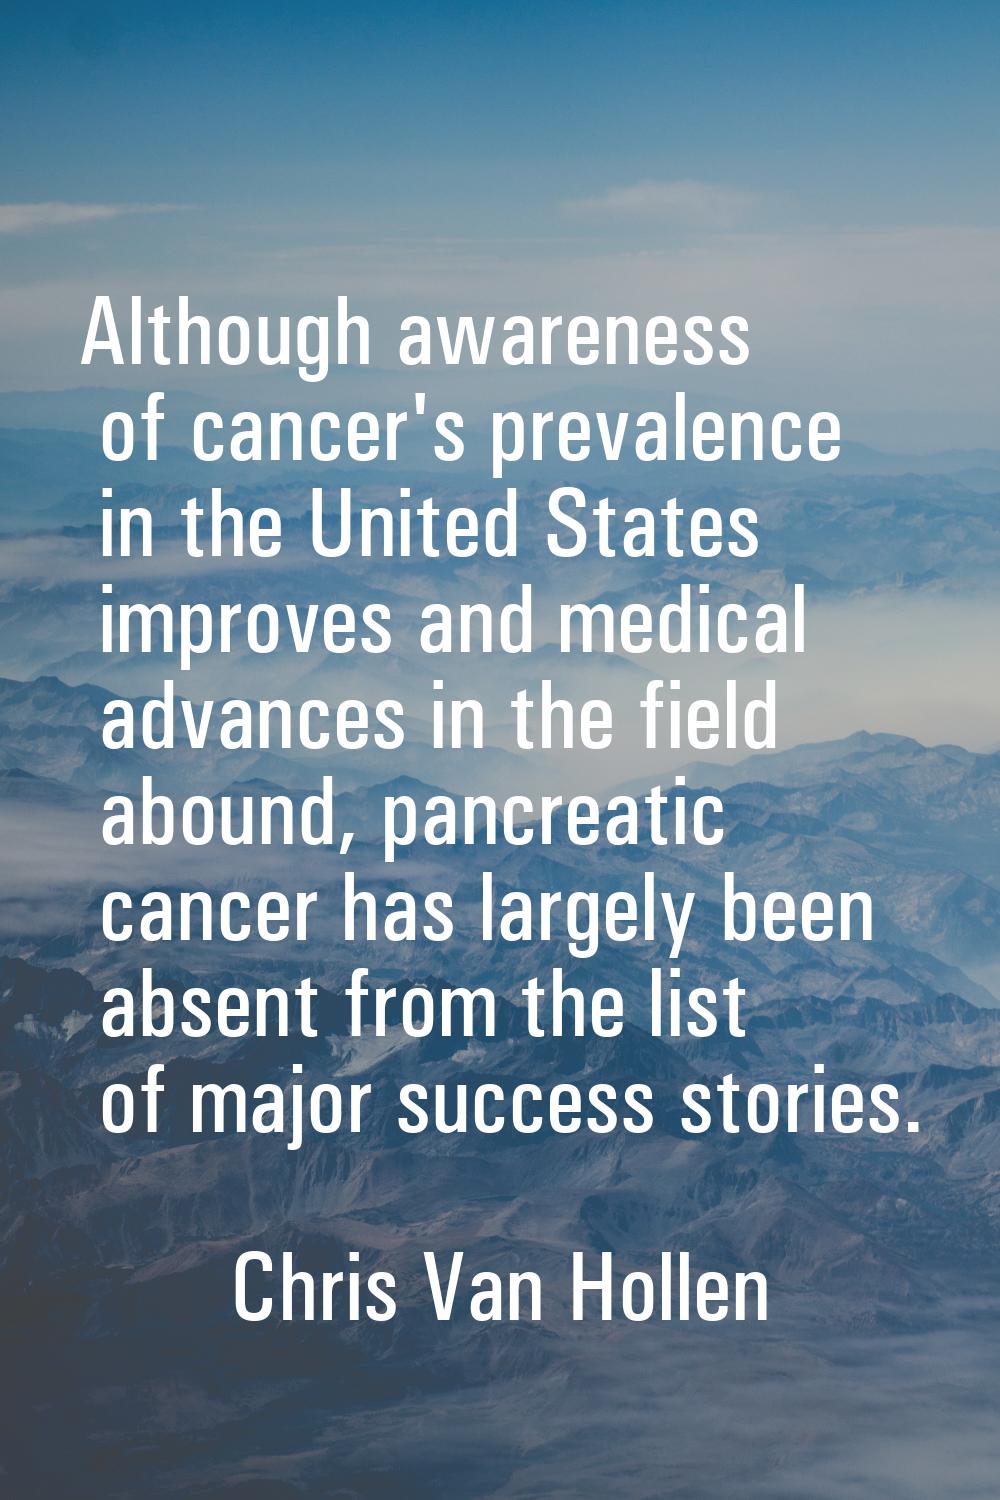 Although awareness of cancer's prevalence in the United States improves and medical advances in the